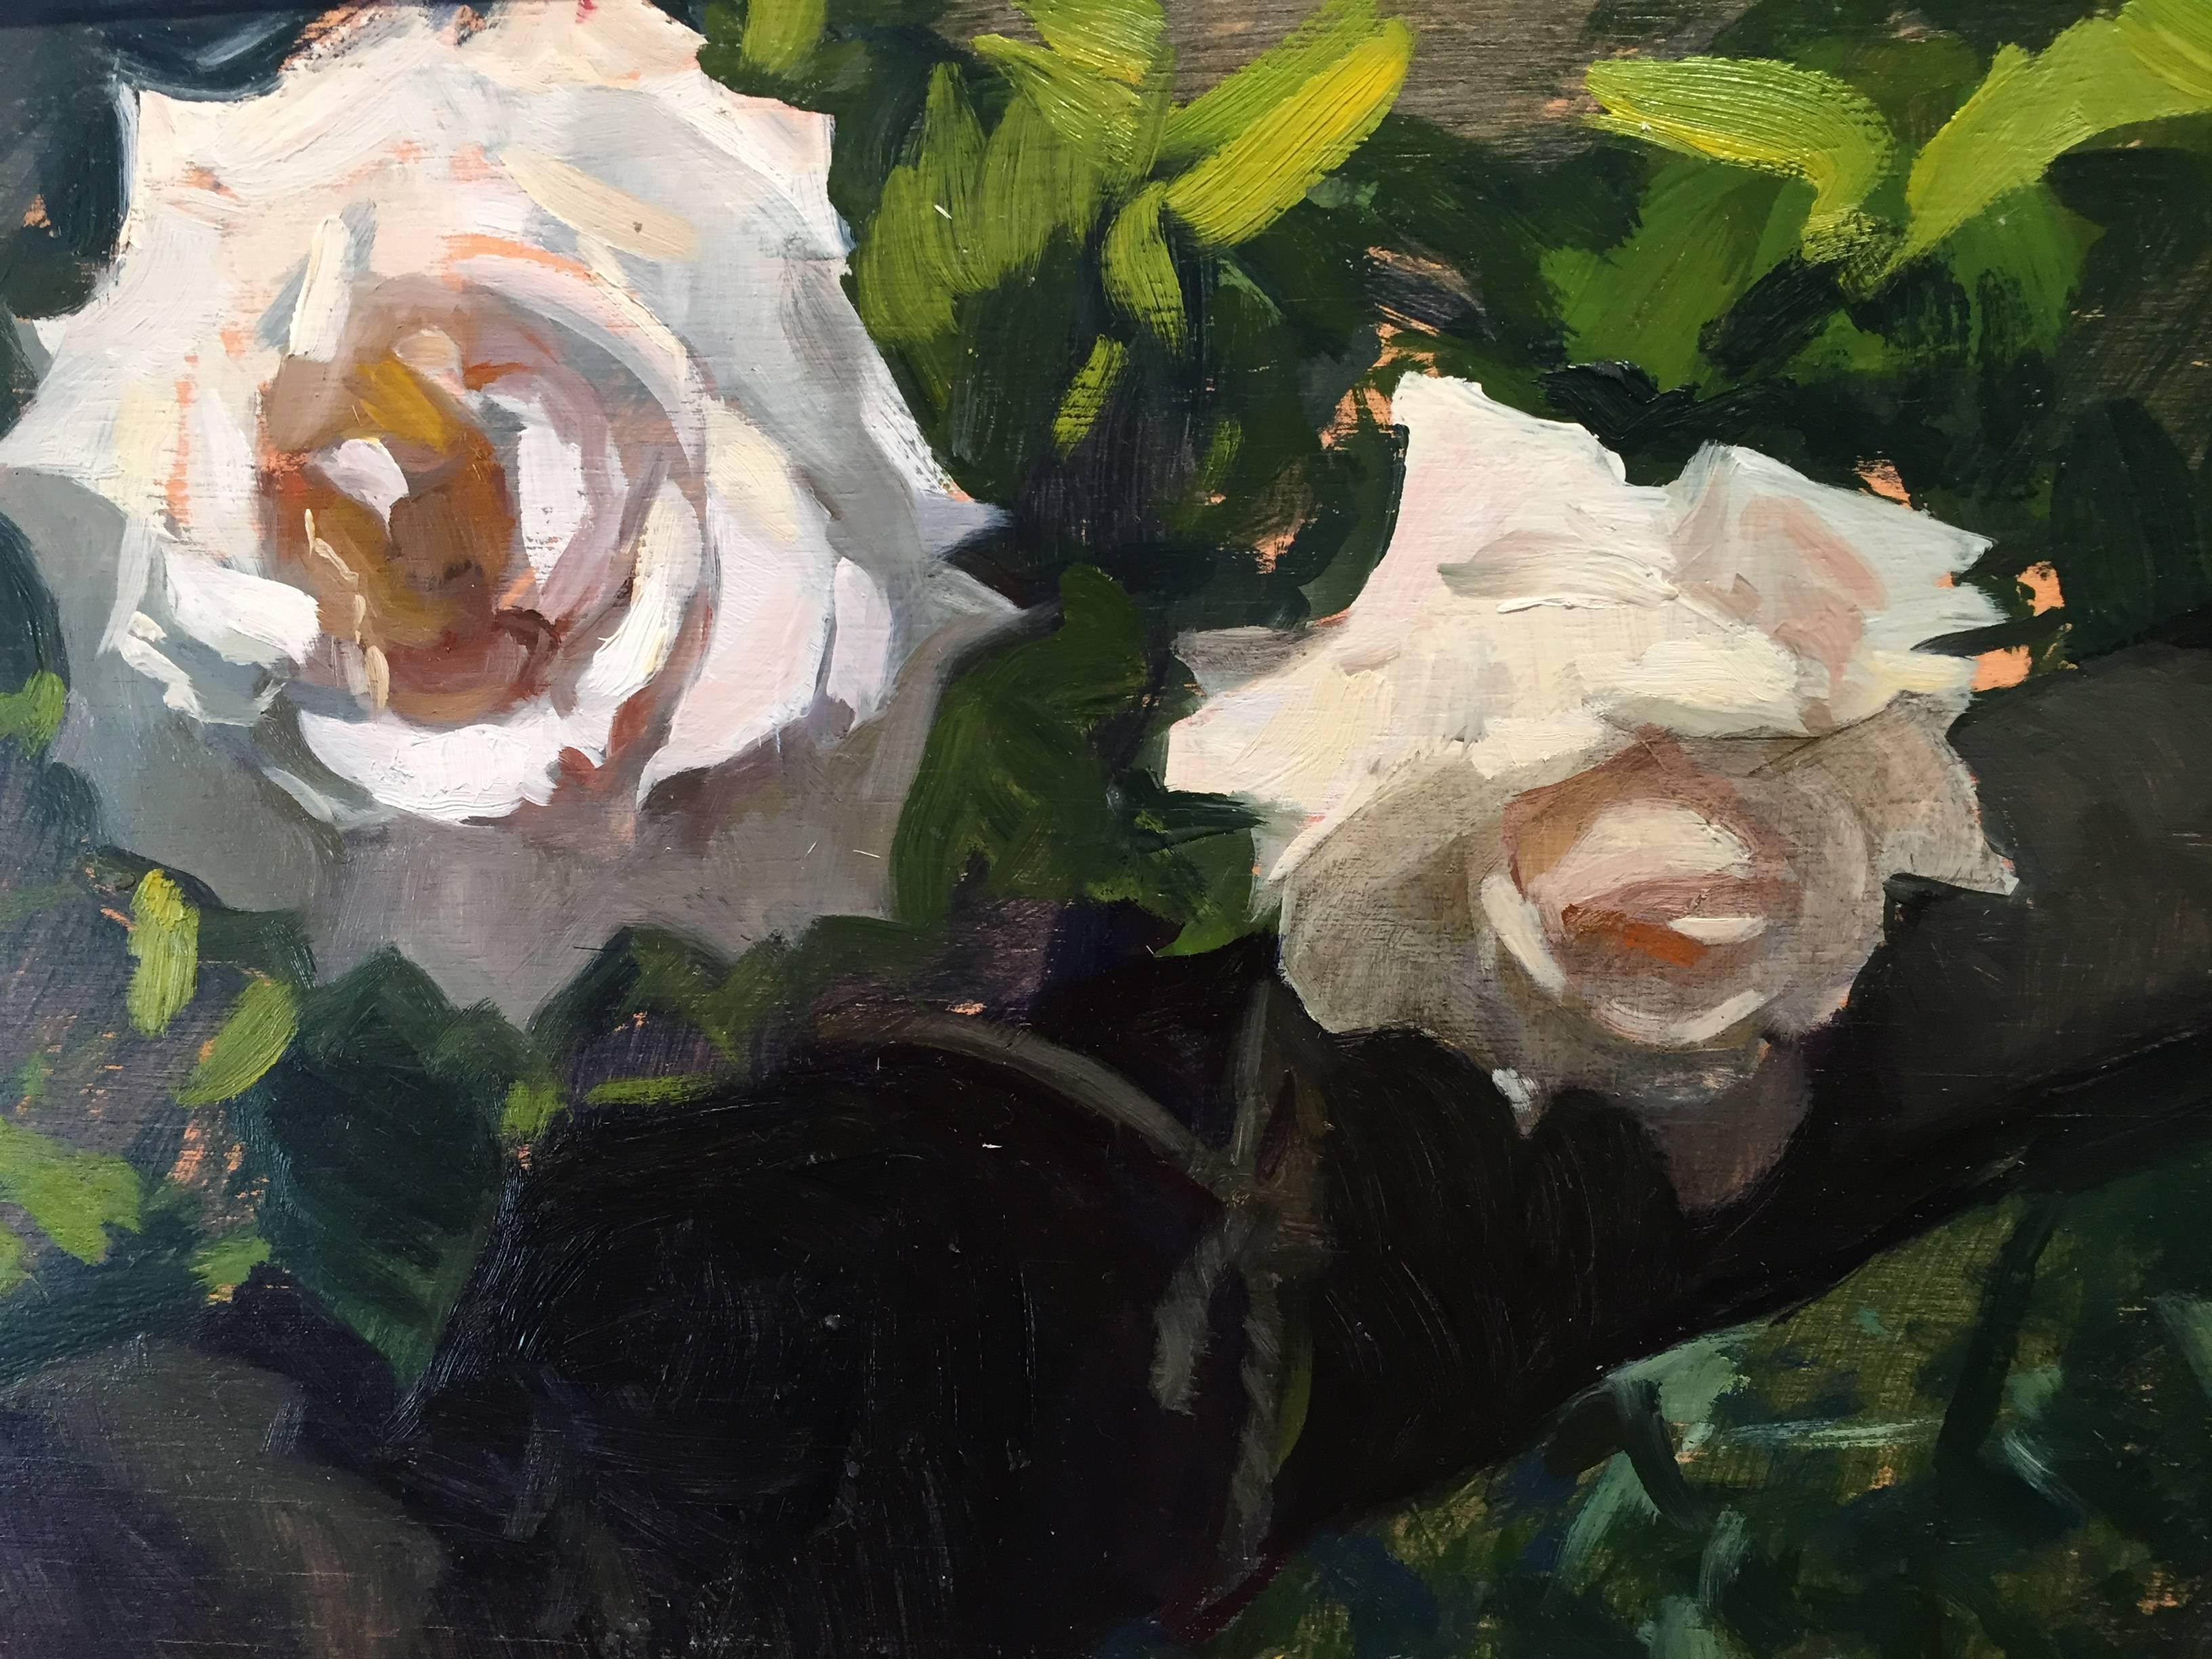 World renowned plein air painter, Marc Dalessio, has captured the essence of two wild roses, how they've grown organically in the natural world. Not trimmed, or arranged at a florist's, 